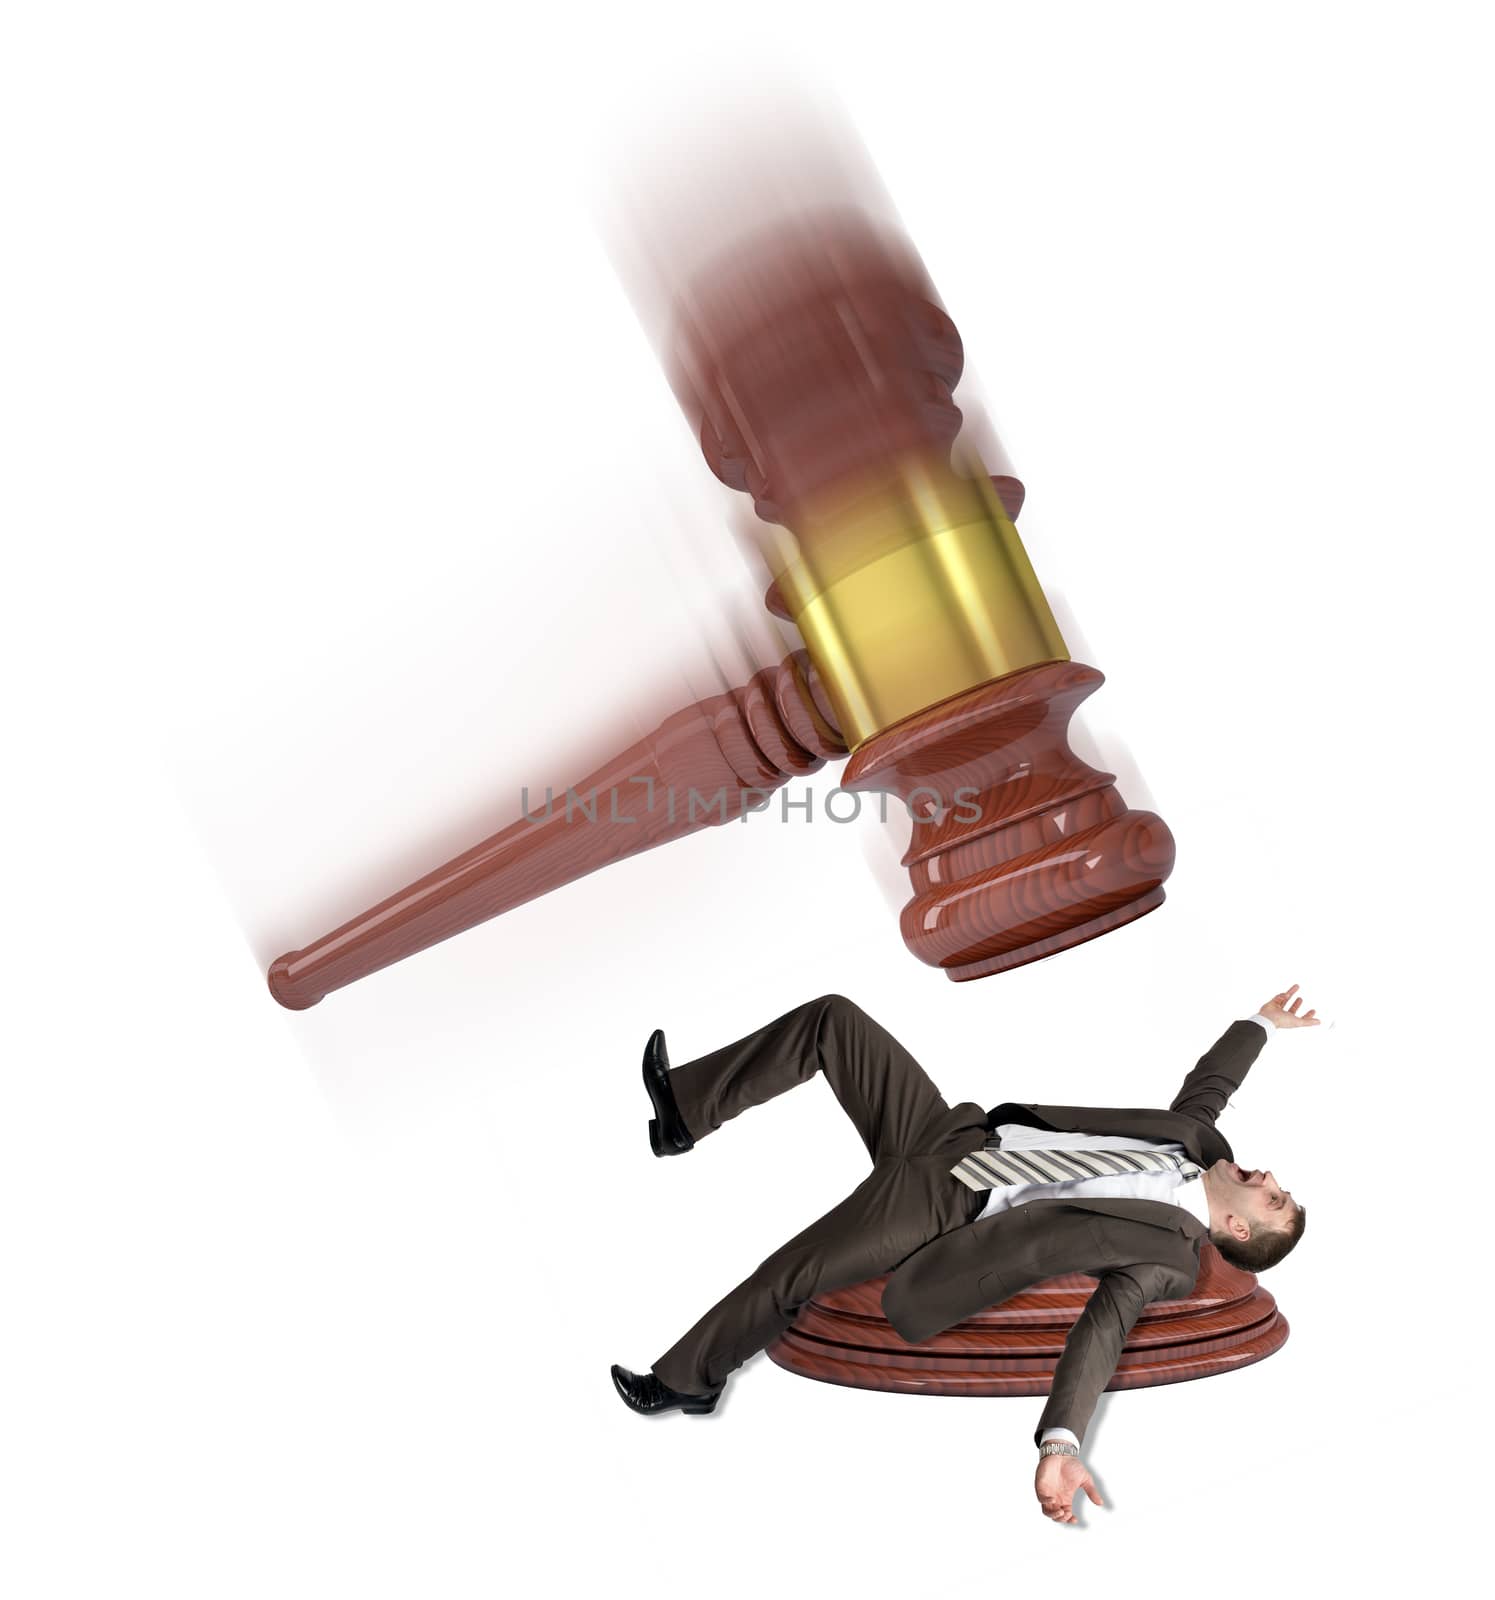 Inscribed gavel hitting scared businessman isolated on white background. Justice concept